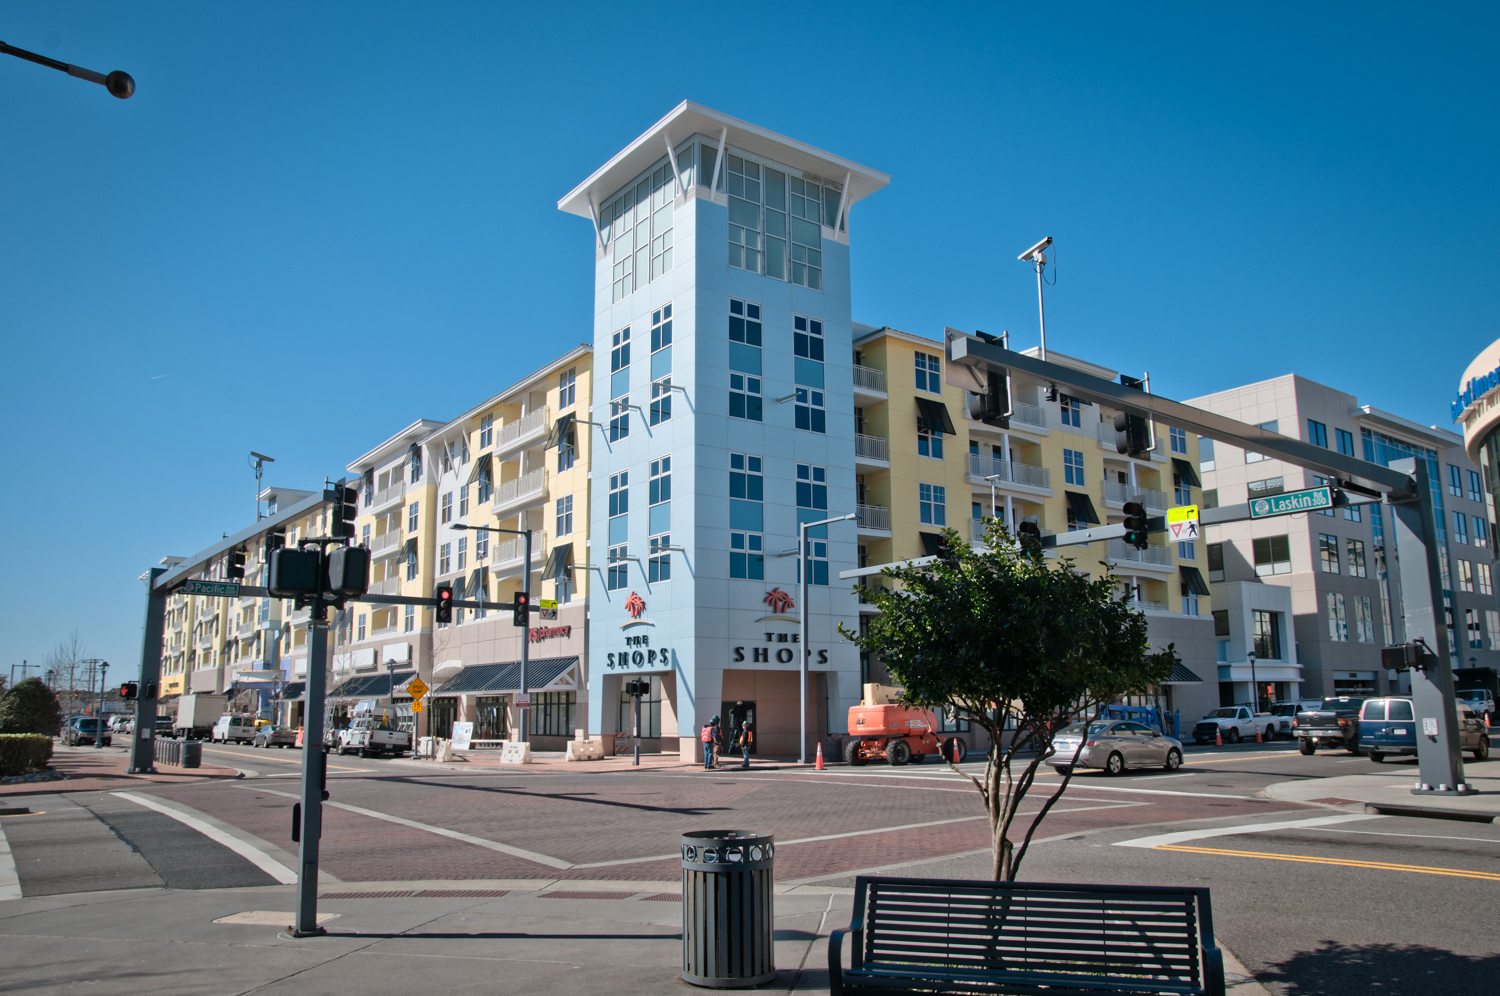 THE 10 CLOSEST Hotels to The Shops at 31Ocean, Virginia Beach